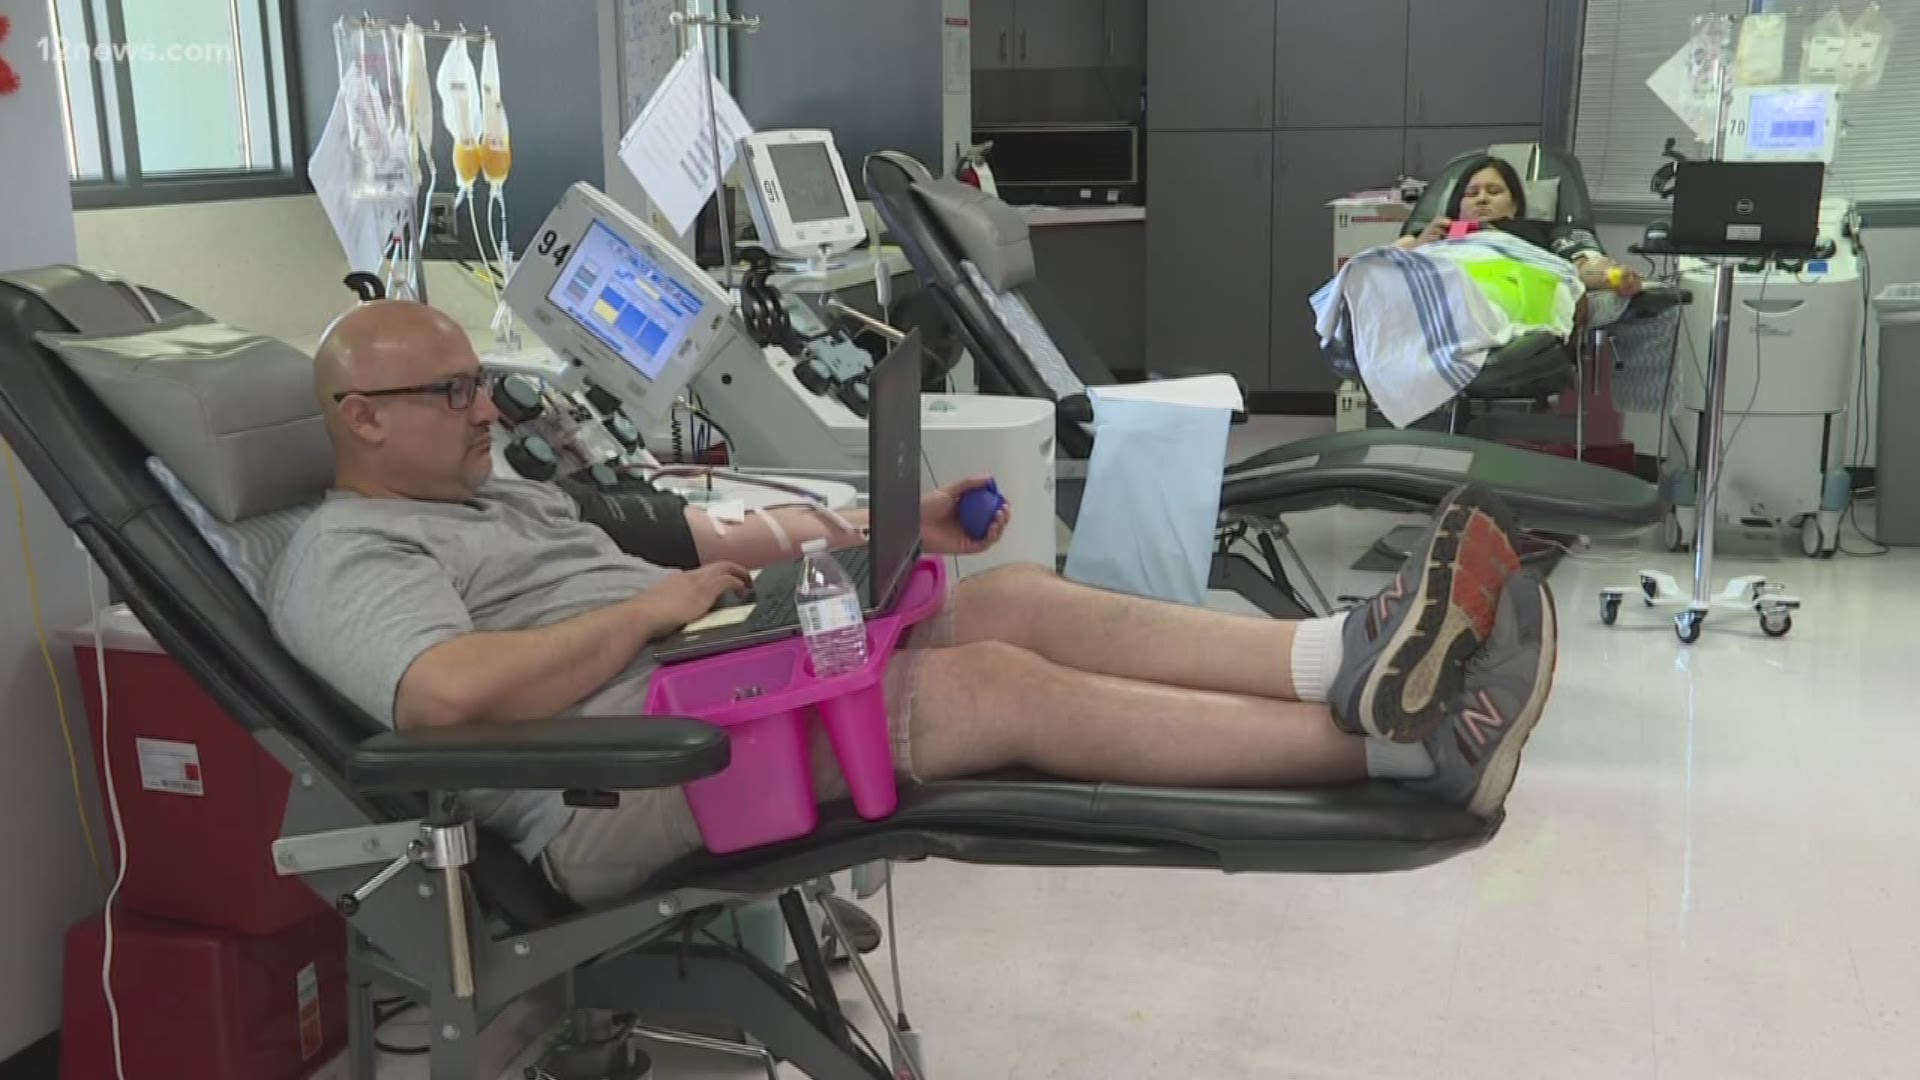 Many people right here in the Valley are doing their part to help victims of the mass shootings, they're donating blood. If you would like to donate you can make an appointment through BloodHero.com. All blood types are needed, especially type "O" positive and negative.